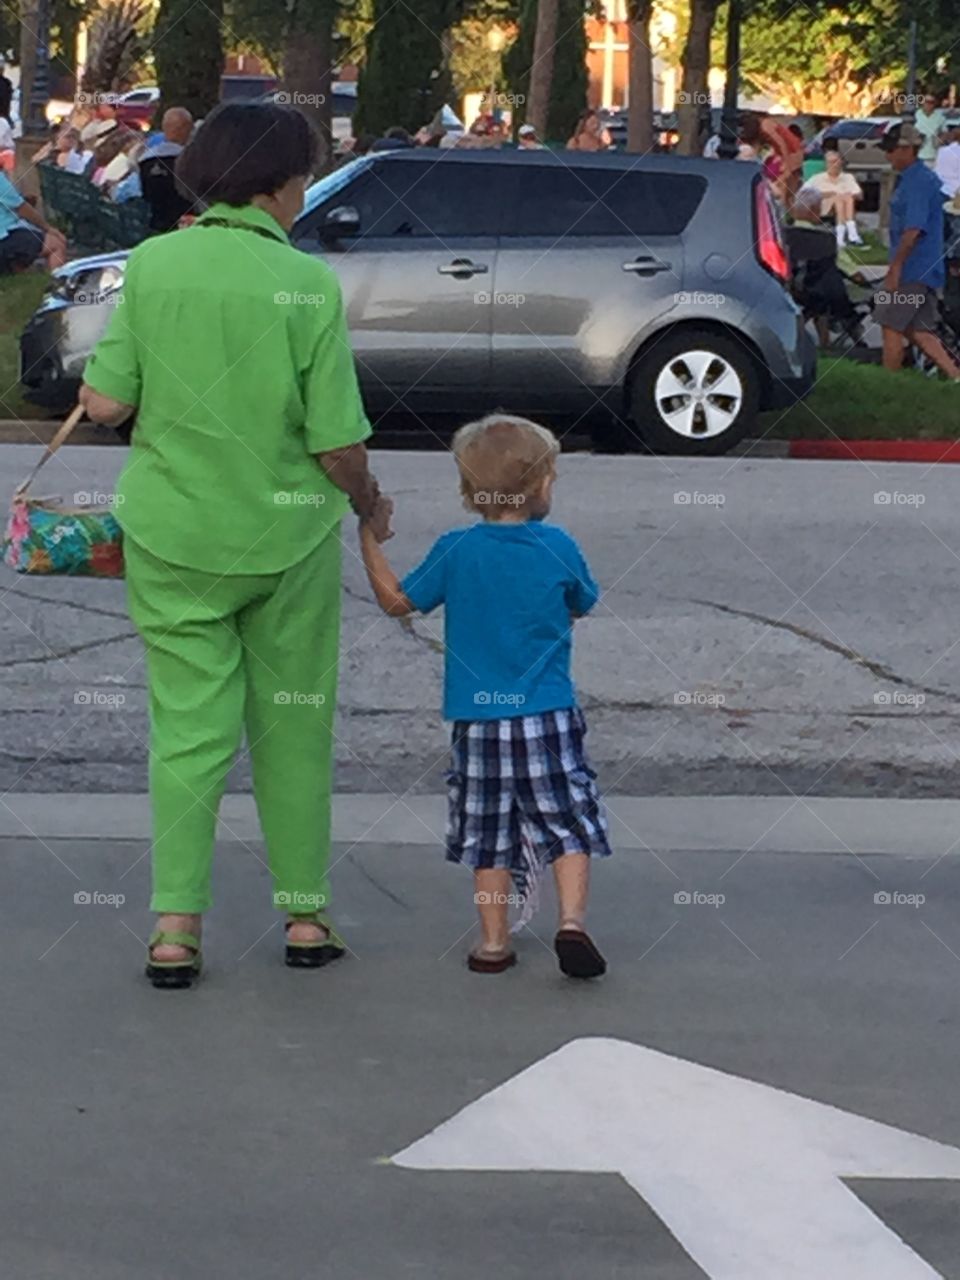 My grandmother and nephew walking hand in hand